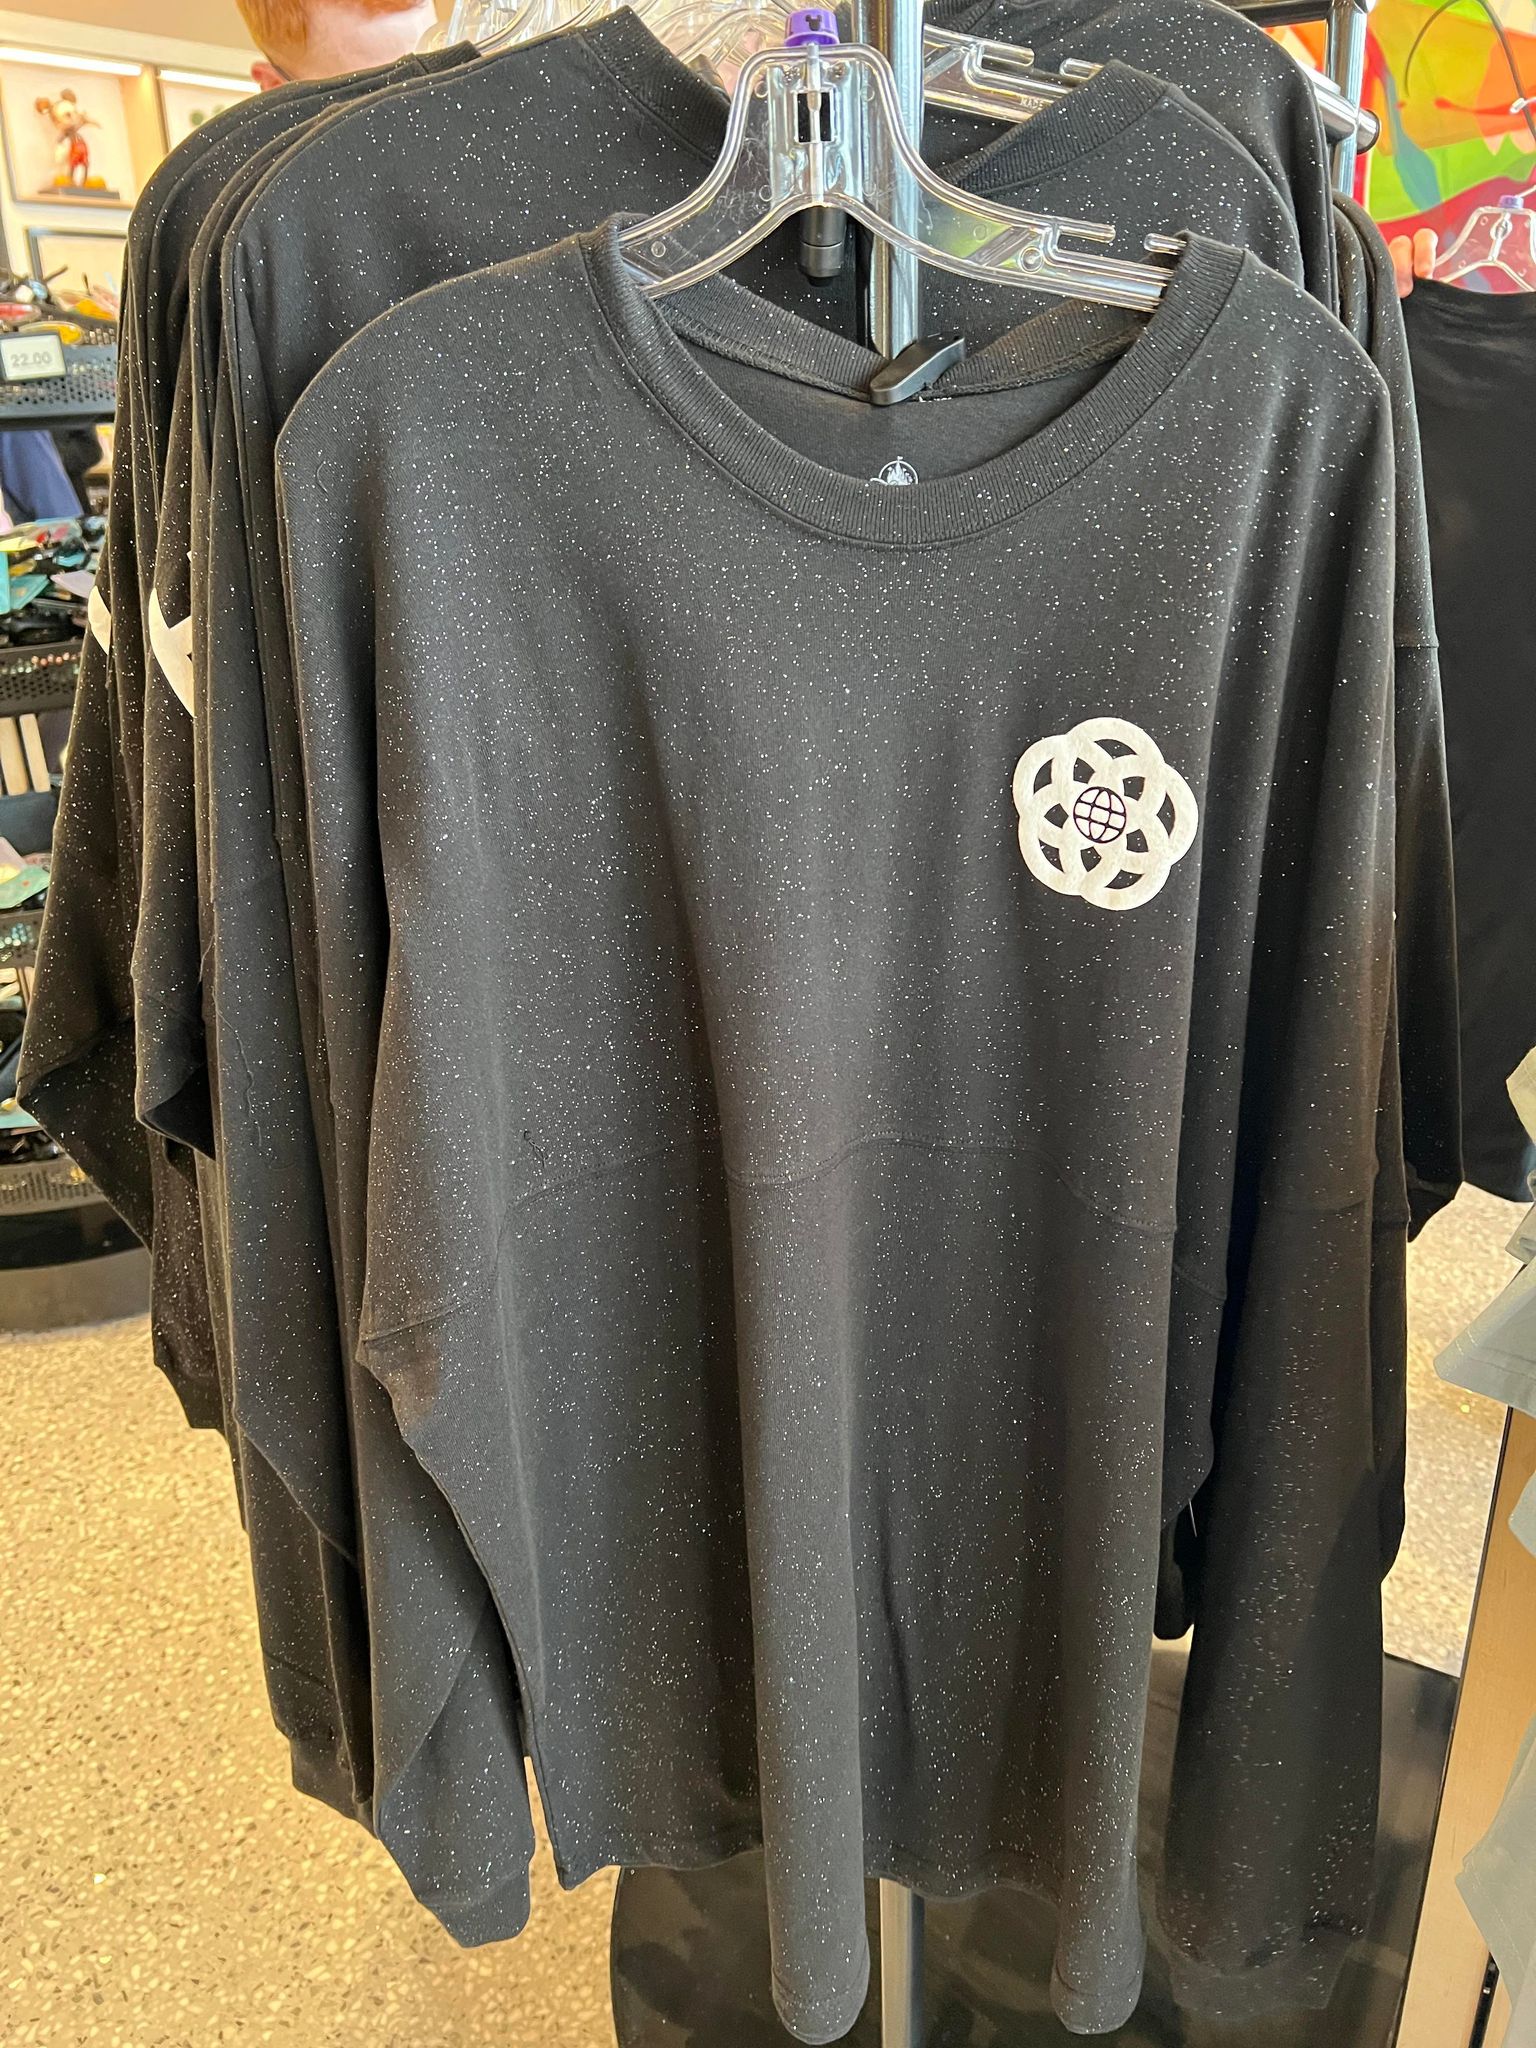 PHOTOS: New 'Harmonious' Spirit Jersey Available at EPCOT - WDW